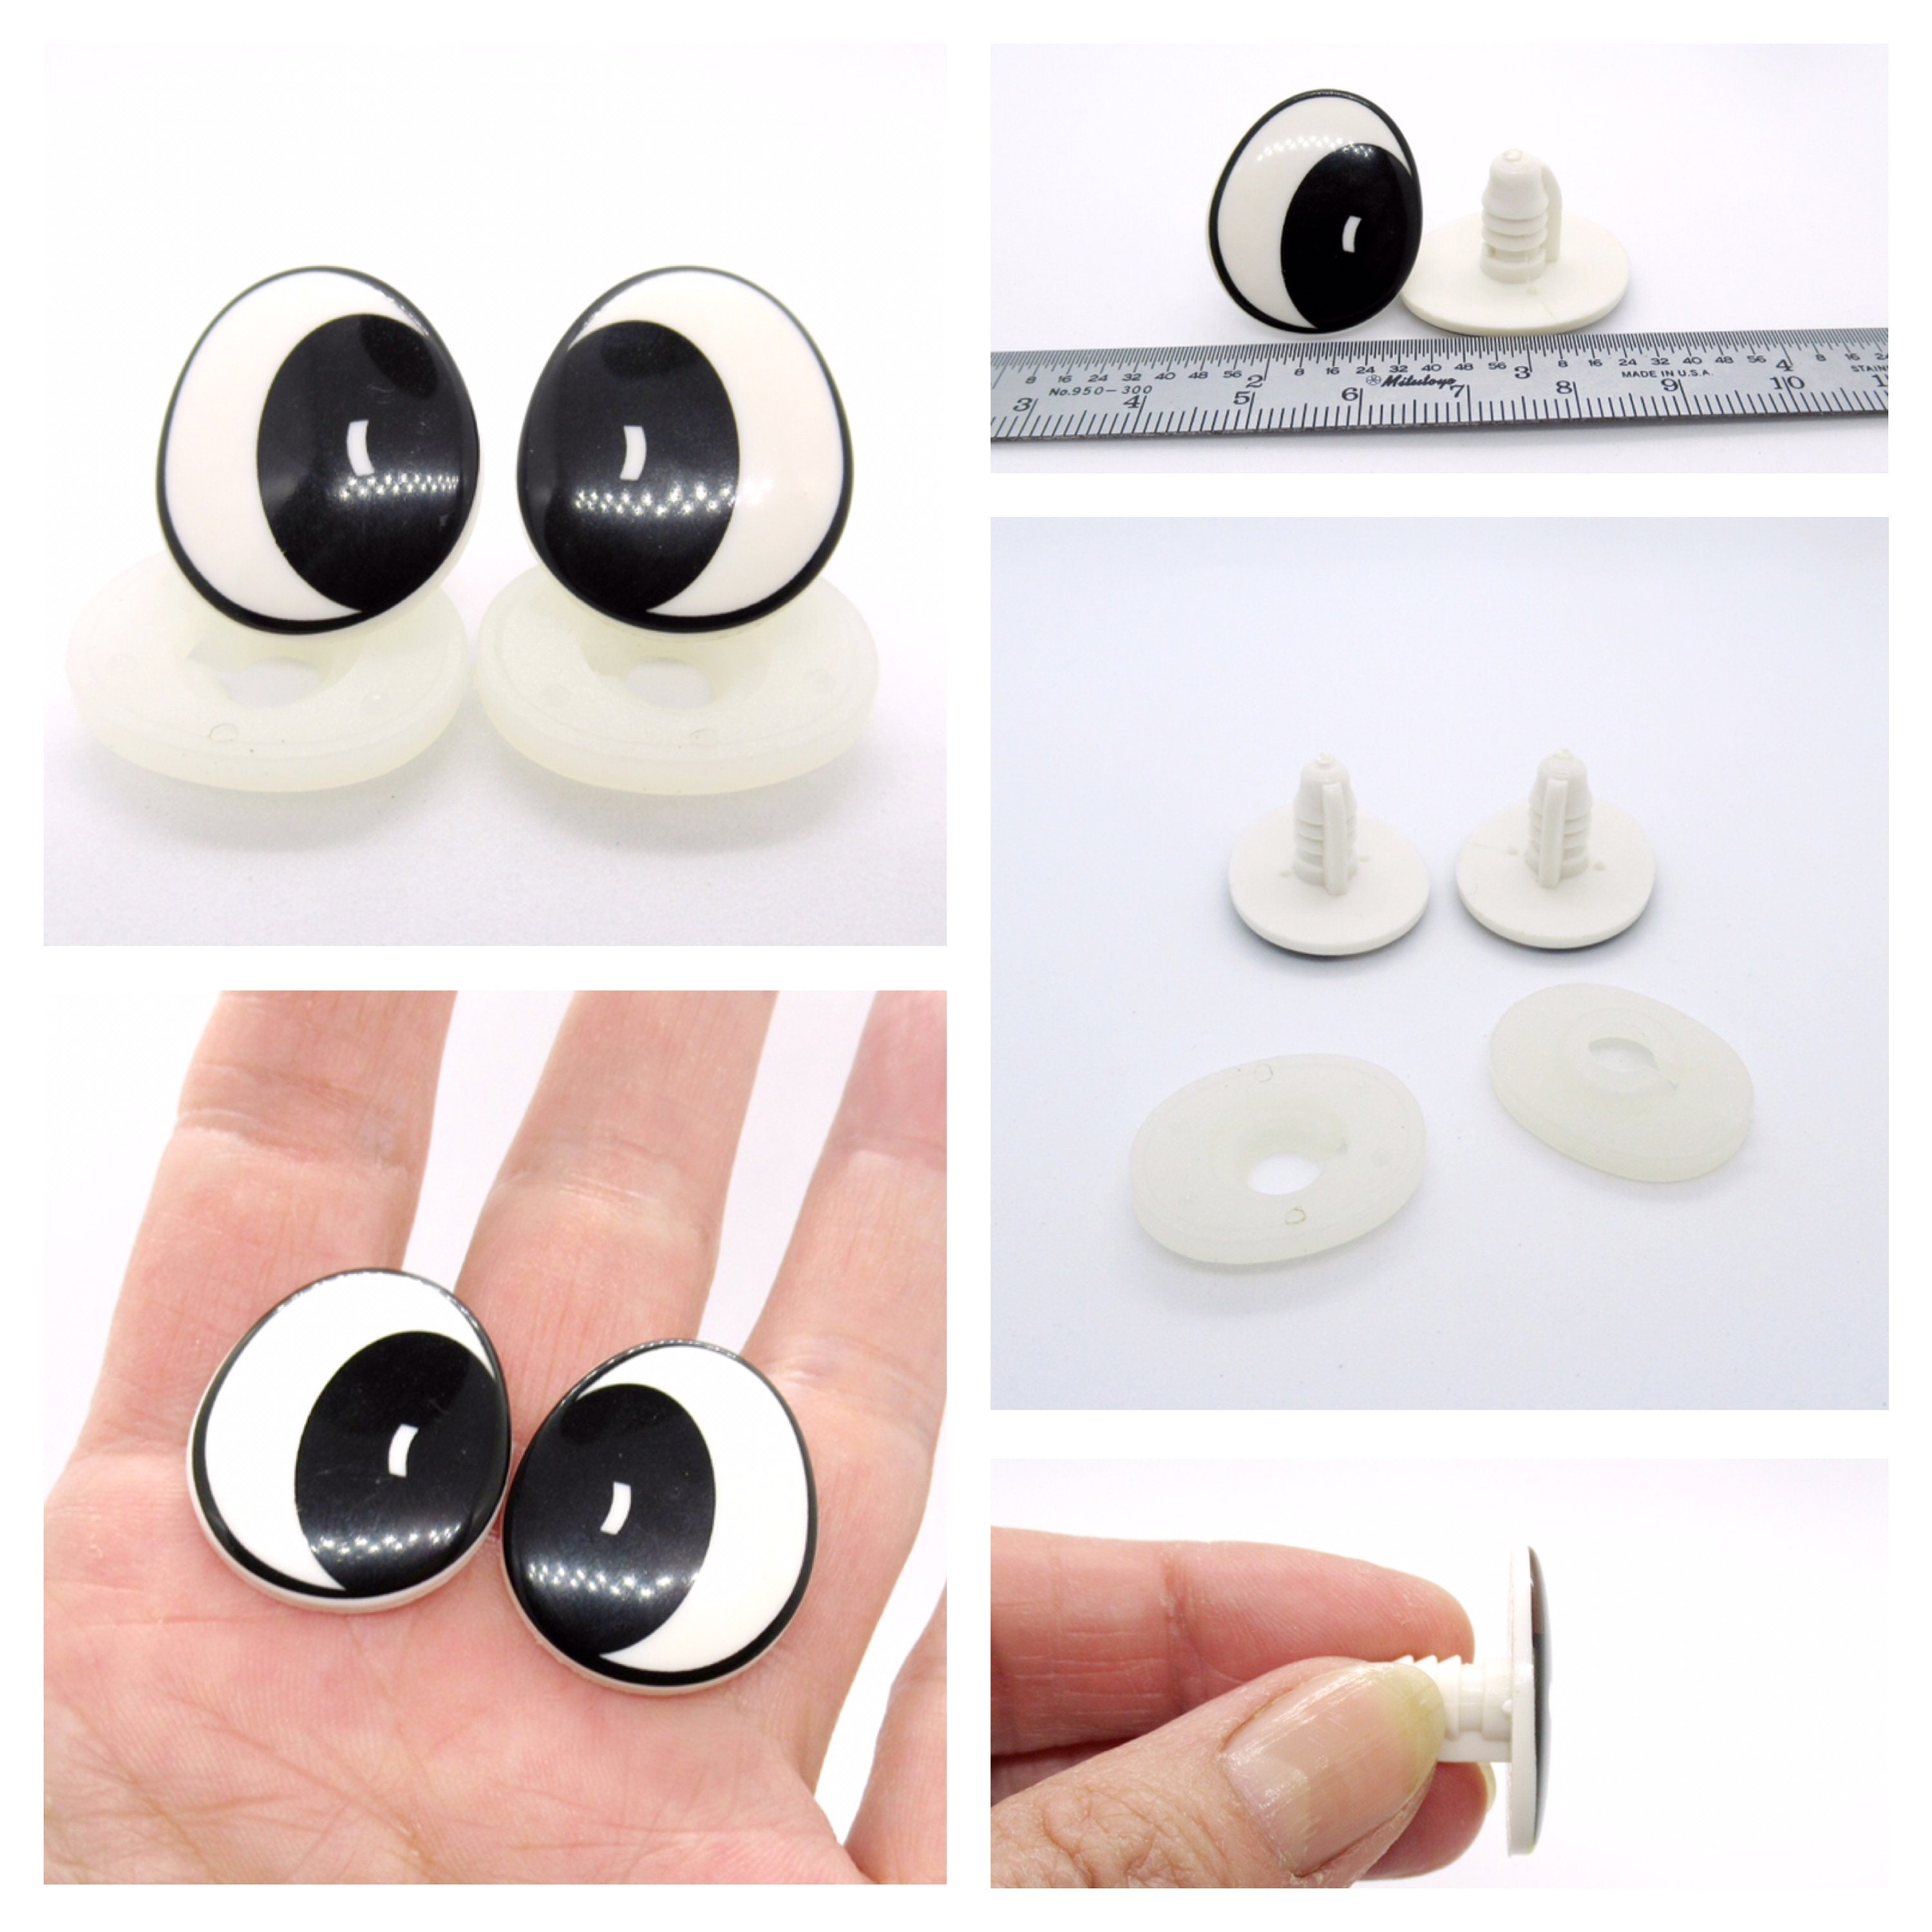 30mm X 20mm Plastic Oval Safety Eyes 1 Pair Puppet Eyes Plastic Eyes Oval  Comic Eyes Fun Eyes Black and White Eyes -  Norway